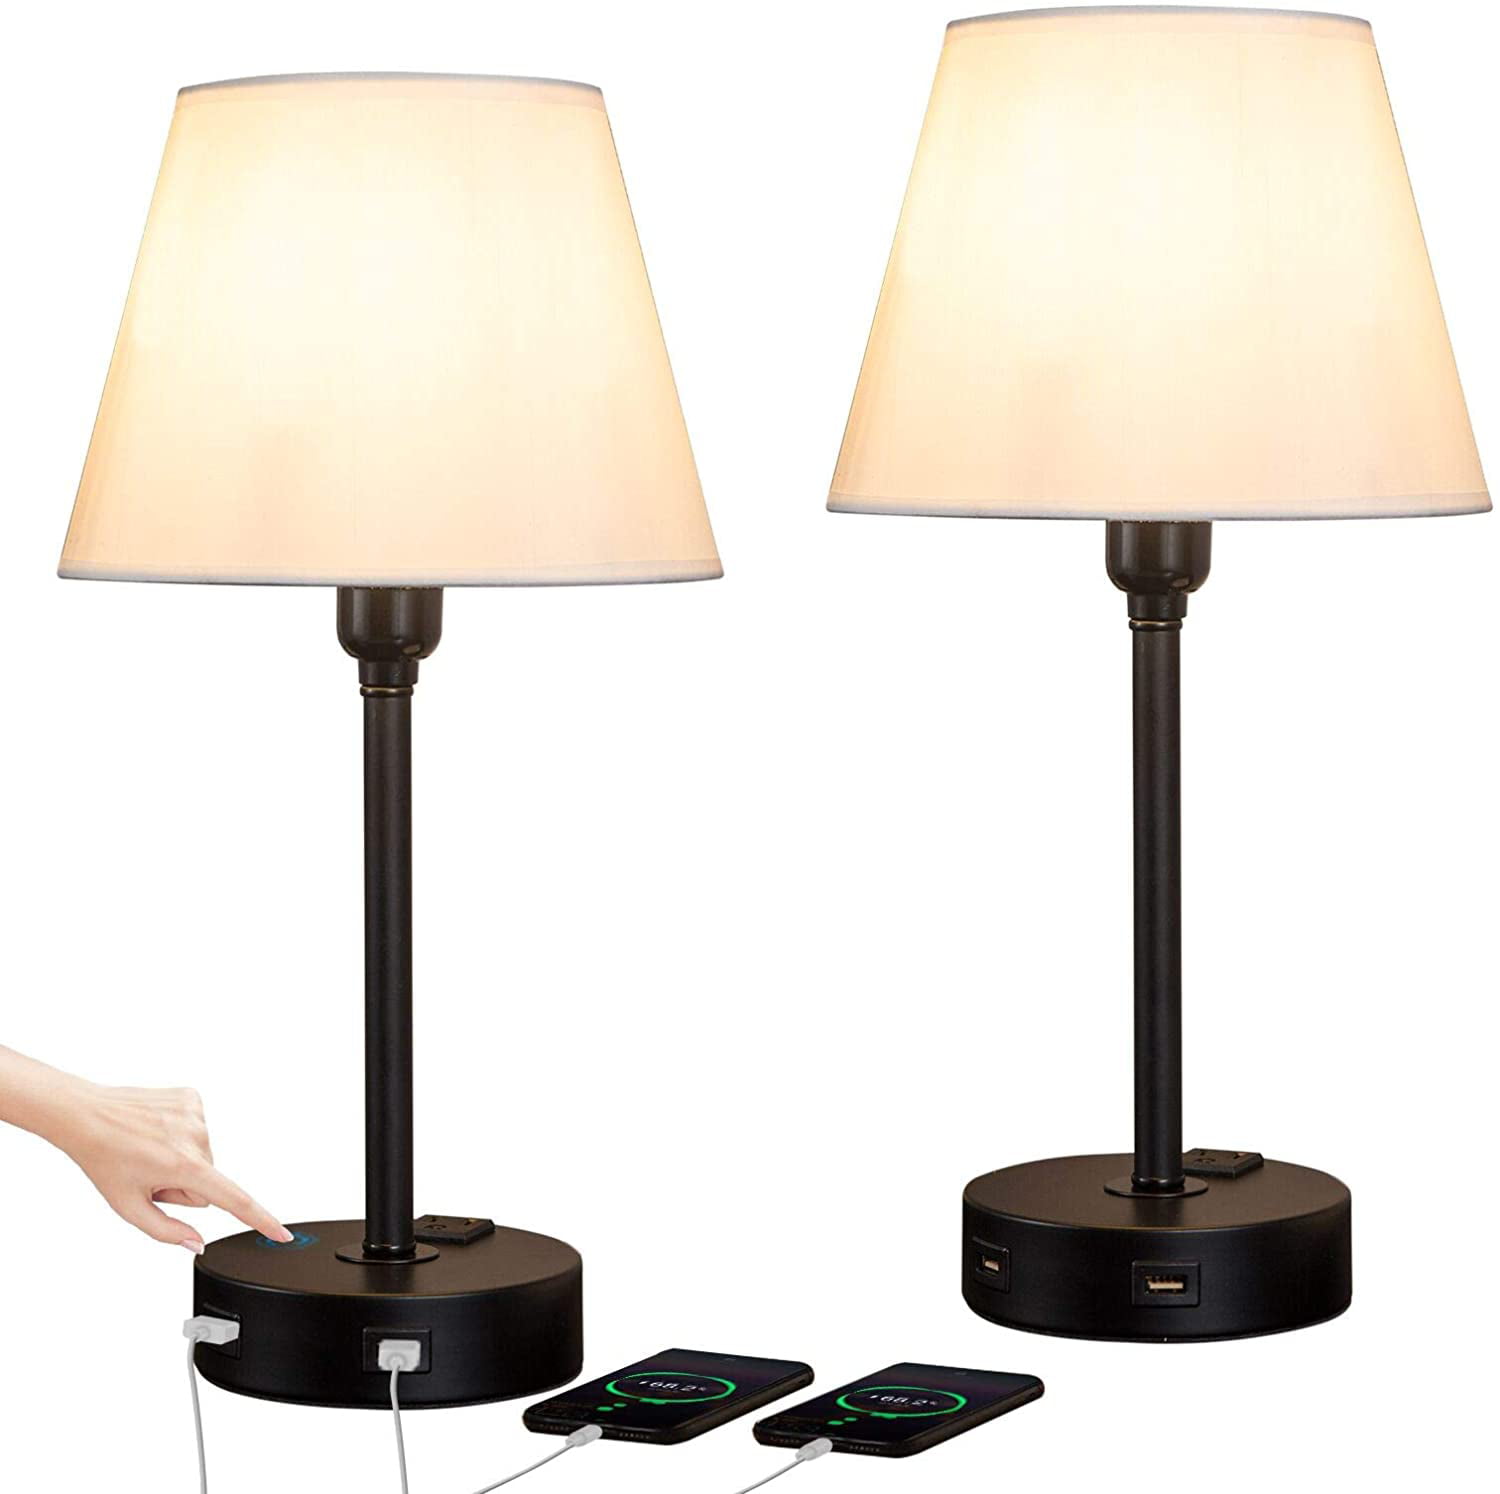 Small Modern Desk Lamp for Bedroom Living Room Study Room Nightstand Bedside Lamp with Dual USB Charging Ports Table Lamp Touch Control Lamps Set of 2